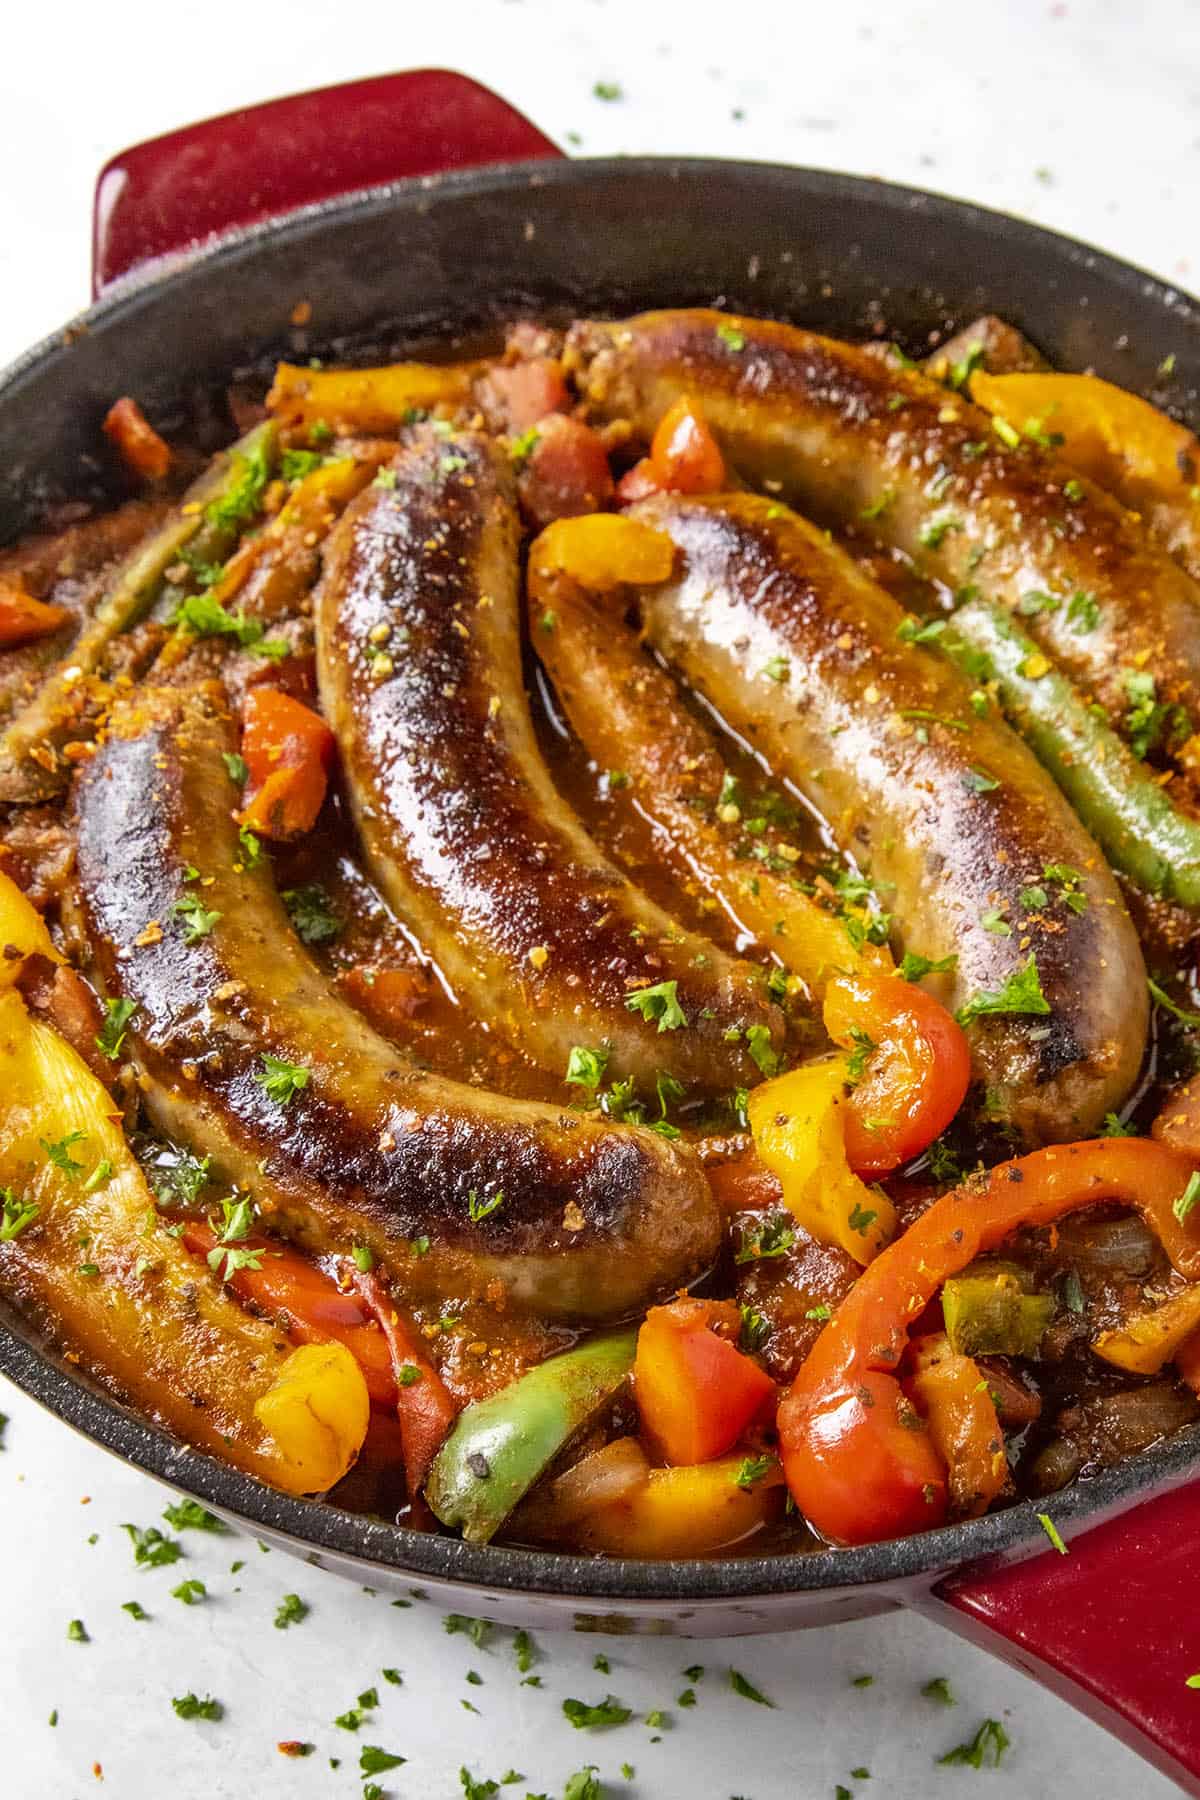 Sausage and Peppers served in a skillet.